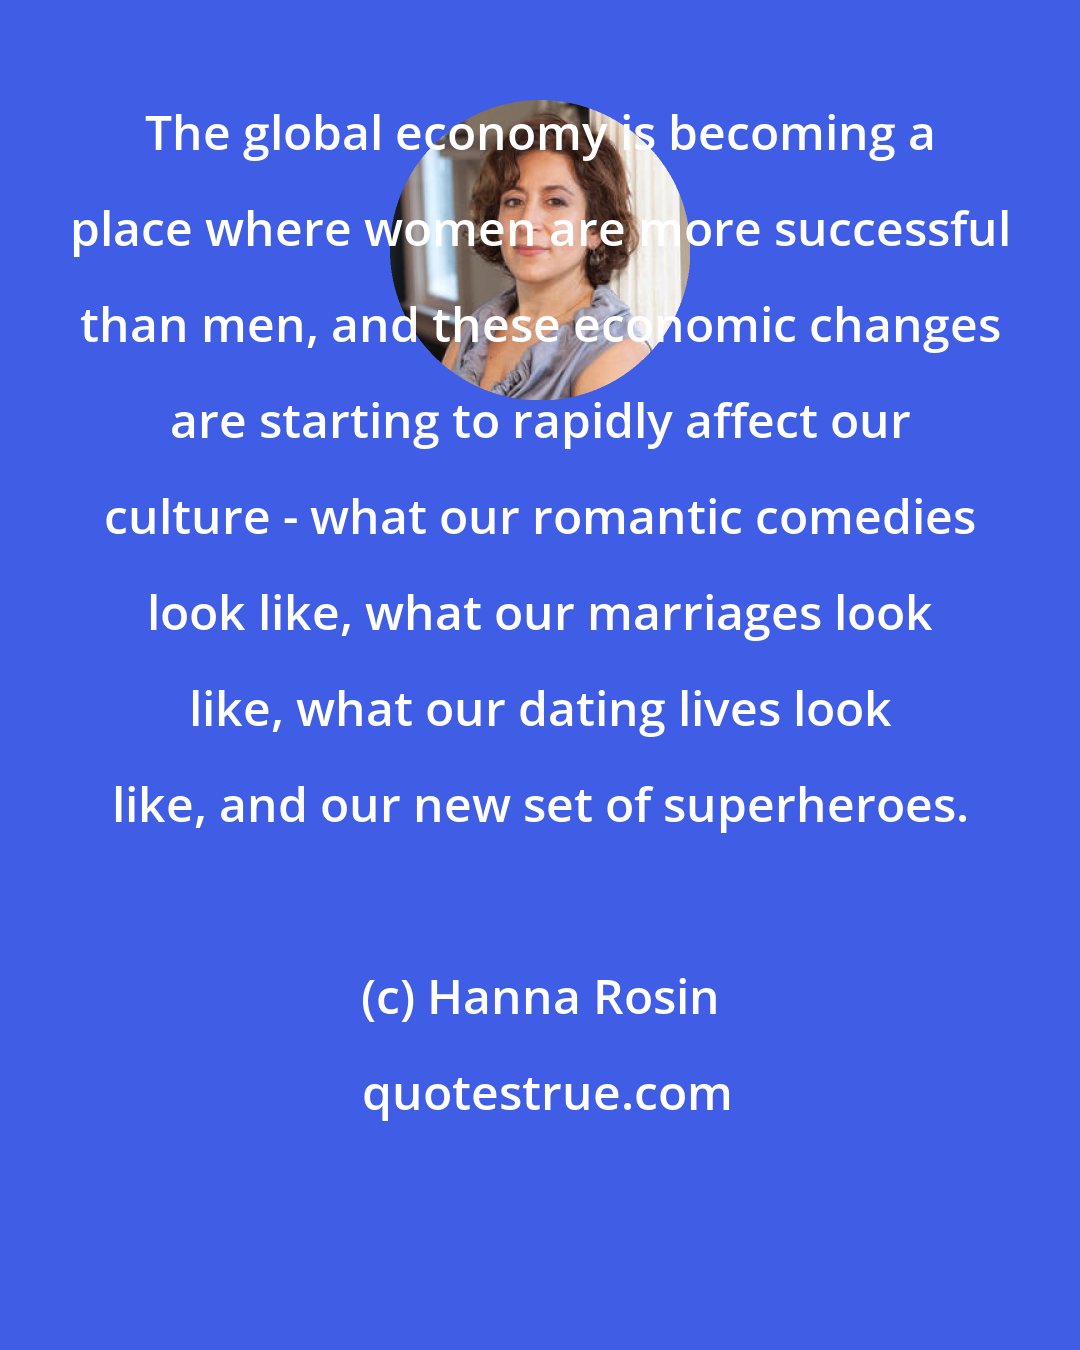 Hanna Rosin: The global economy is becoming a place where women are more successful than men, and these economic changes are starting to rapidly affect our culture - what our romantic comedies look like, what our marriages look like, what our dating lives look like, and our new set of superheroes.